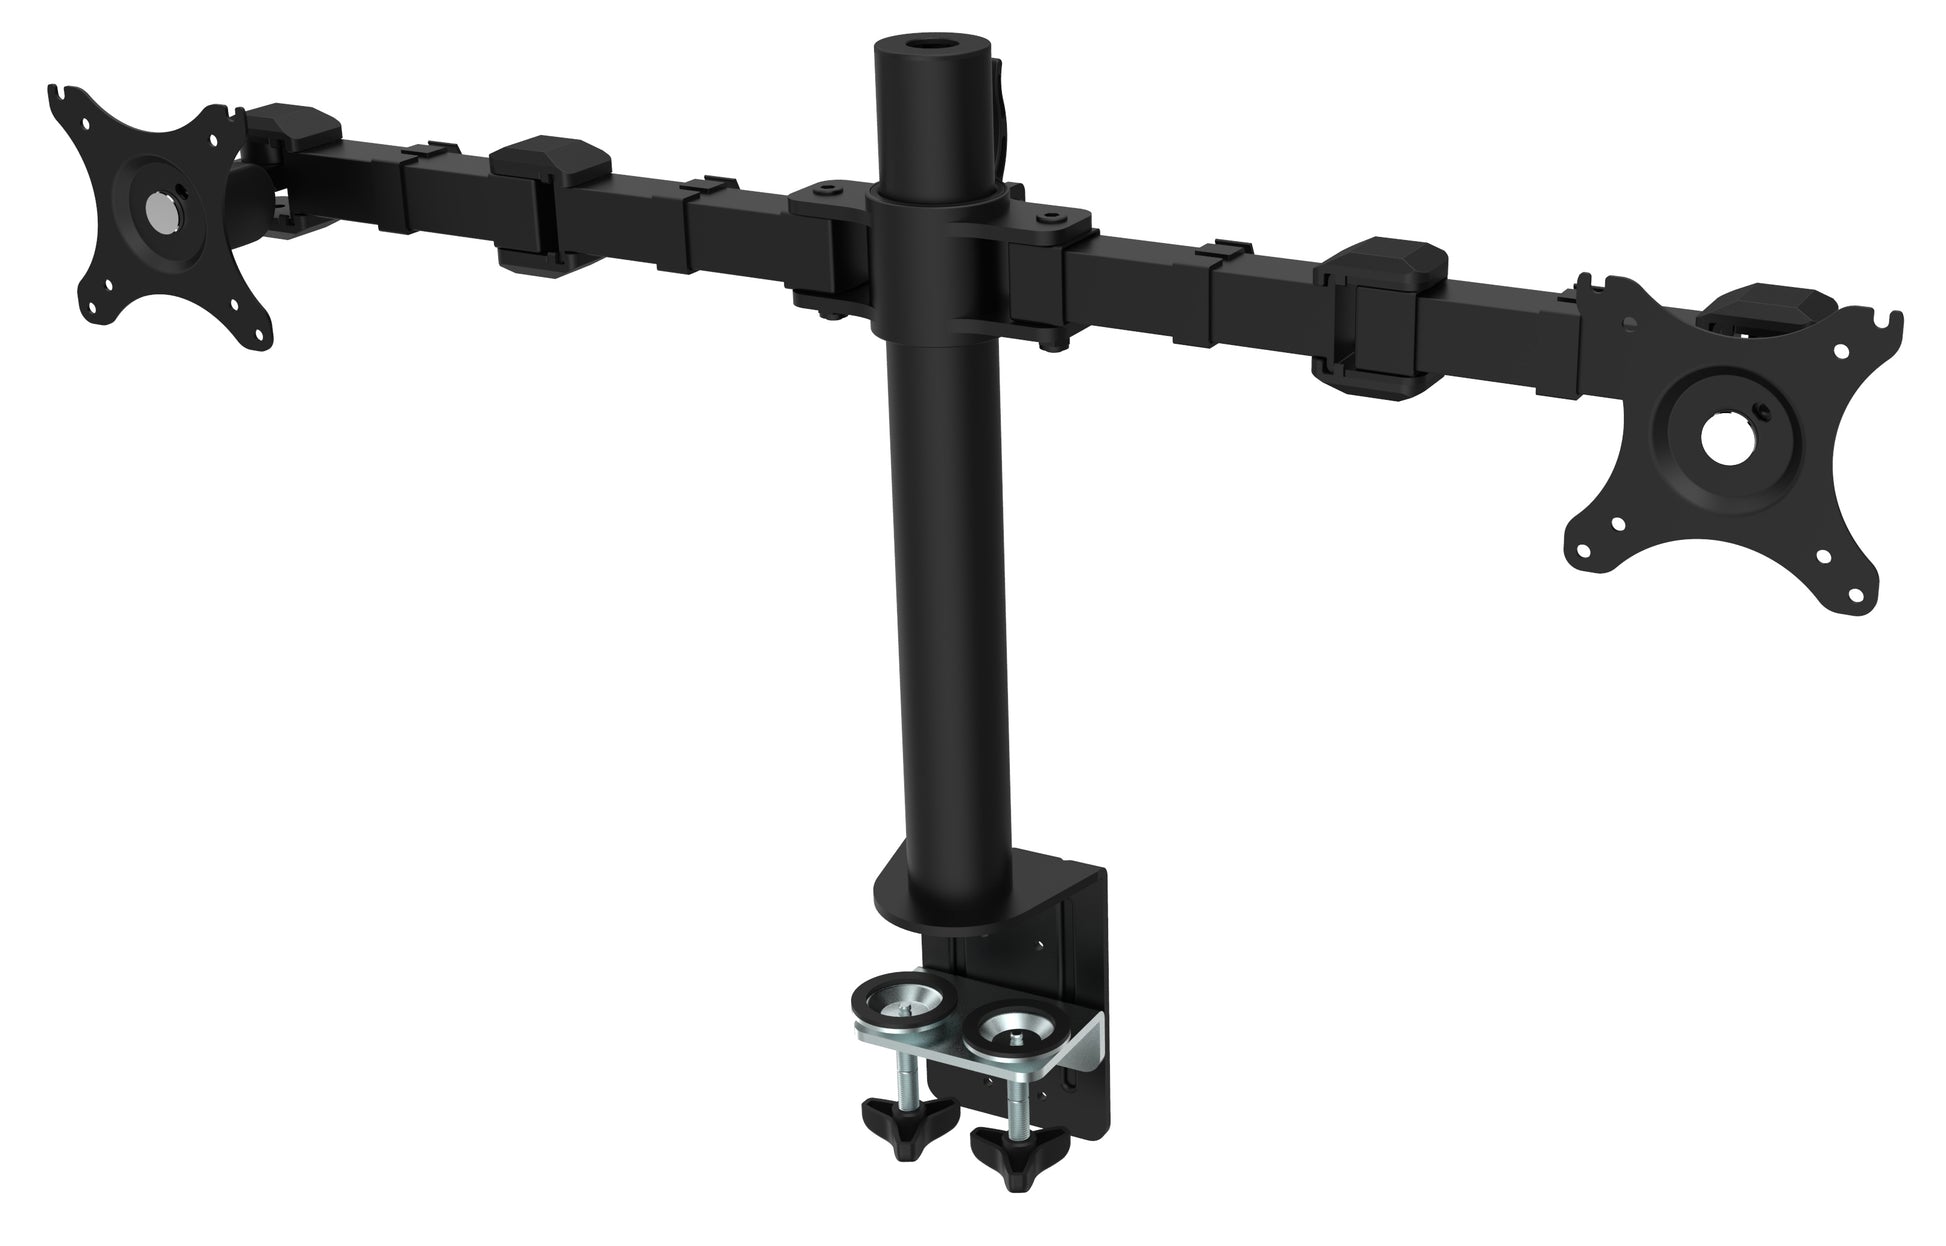 Buy Rapidline Revolve Dual Monitor Arm FREE SHIPPING RMA2 BL Perfect to use with our range of Standing Desks and Desk Converters! Liberate your worktop space and improve posture with a Revolve pole mounted dual monitor arm. With 360 degrees horizontal adjustment and cable management within the pole, available in black